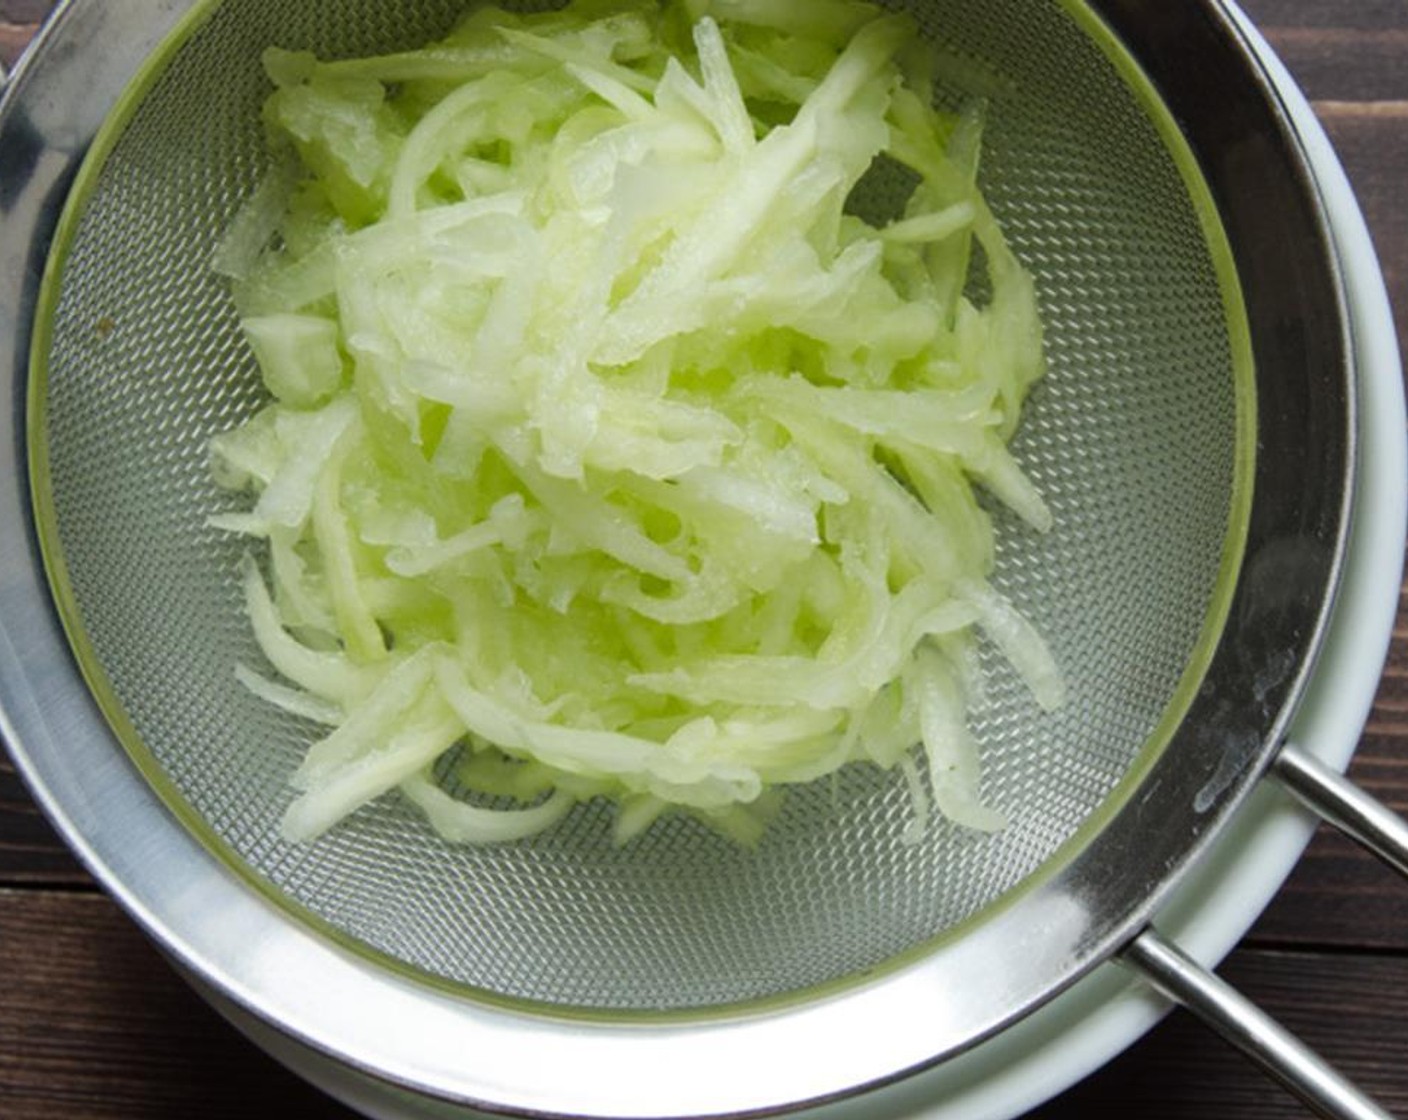 step 12 For the Tzatziki, mince the Garlic (1 clove) and zest the Lemon (1). Peel the Cucumber (1/2) and grate it. Place the cucumber in a sieve over a bowl. Add a pinch of salt to the cucumber and let the water drain out of it for 5 minutes.